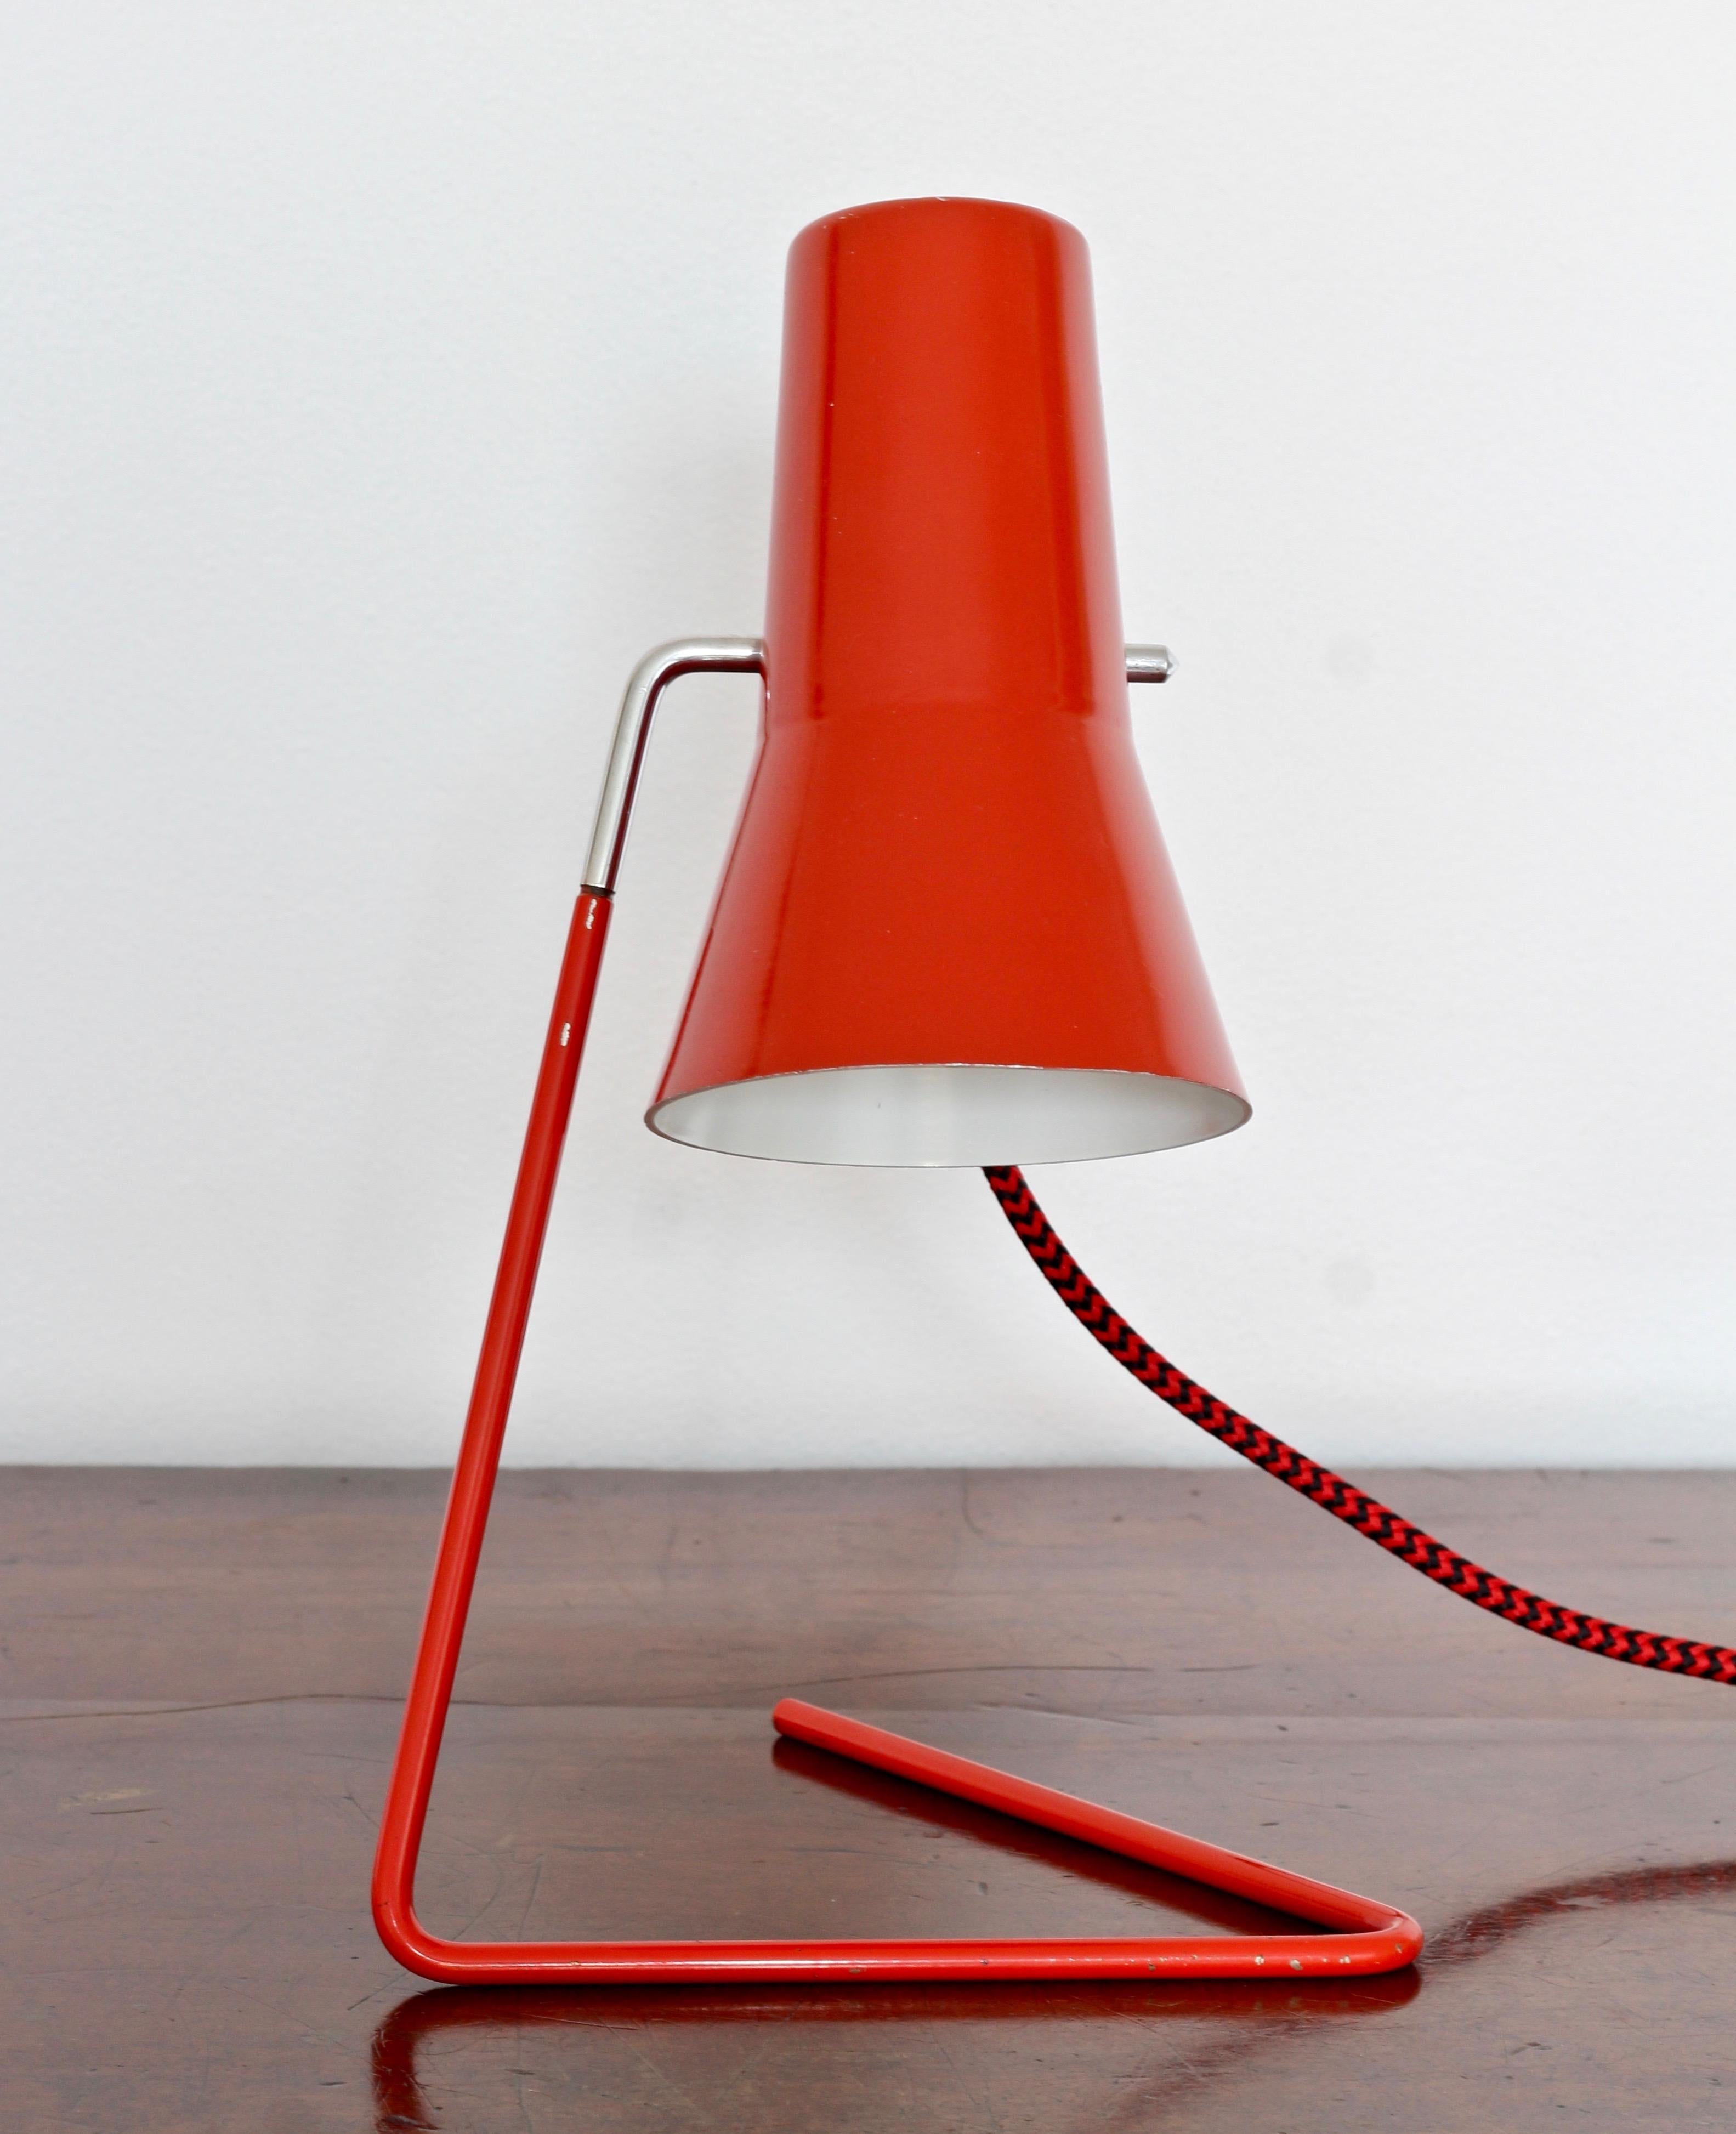 This table lamp was designed by Josef Hurka for the Drupol-Praha Company in Czechoslovakia in the 1950s. The lamps have been rewired with new cotton braid cables that refer stylistically to their design era. The plugs have been exchanged with new